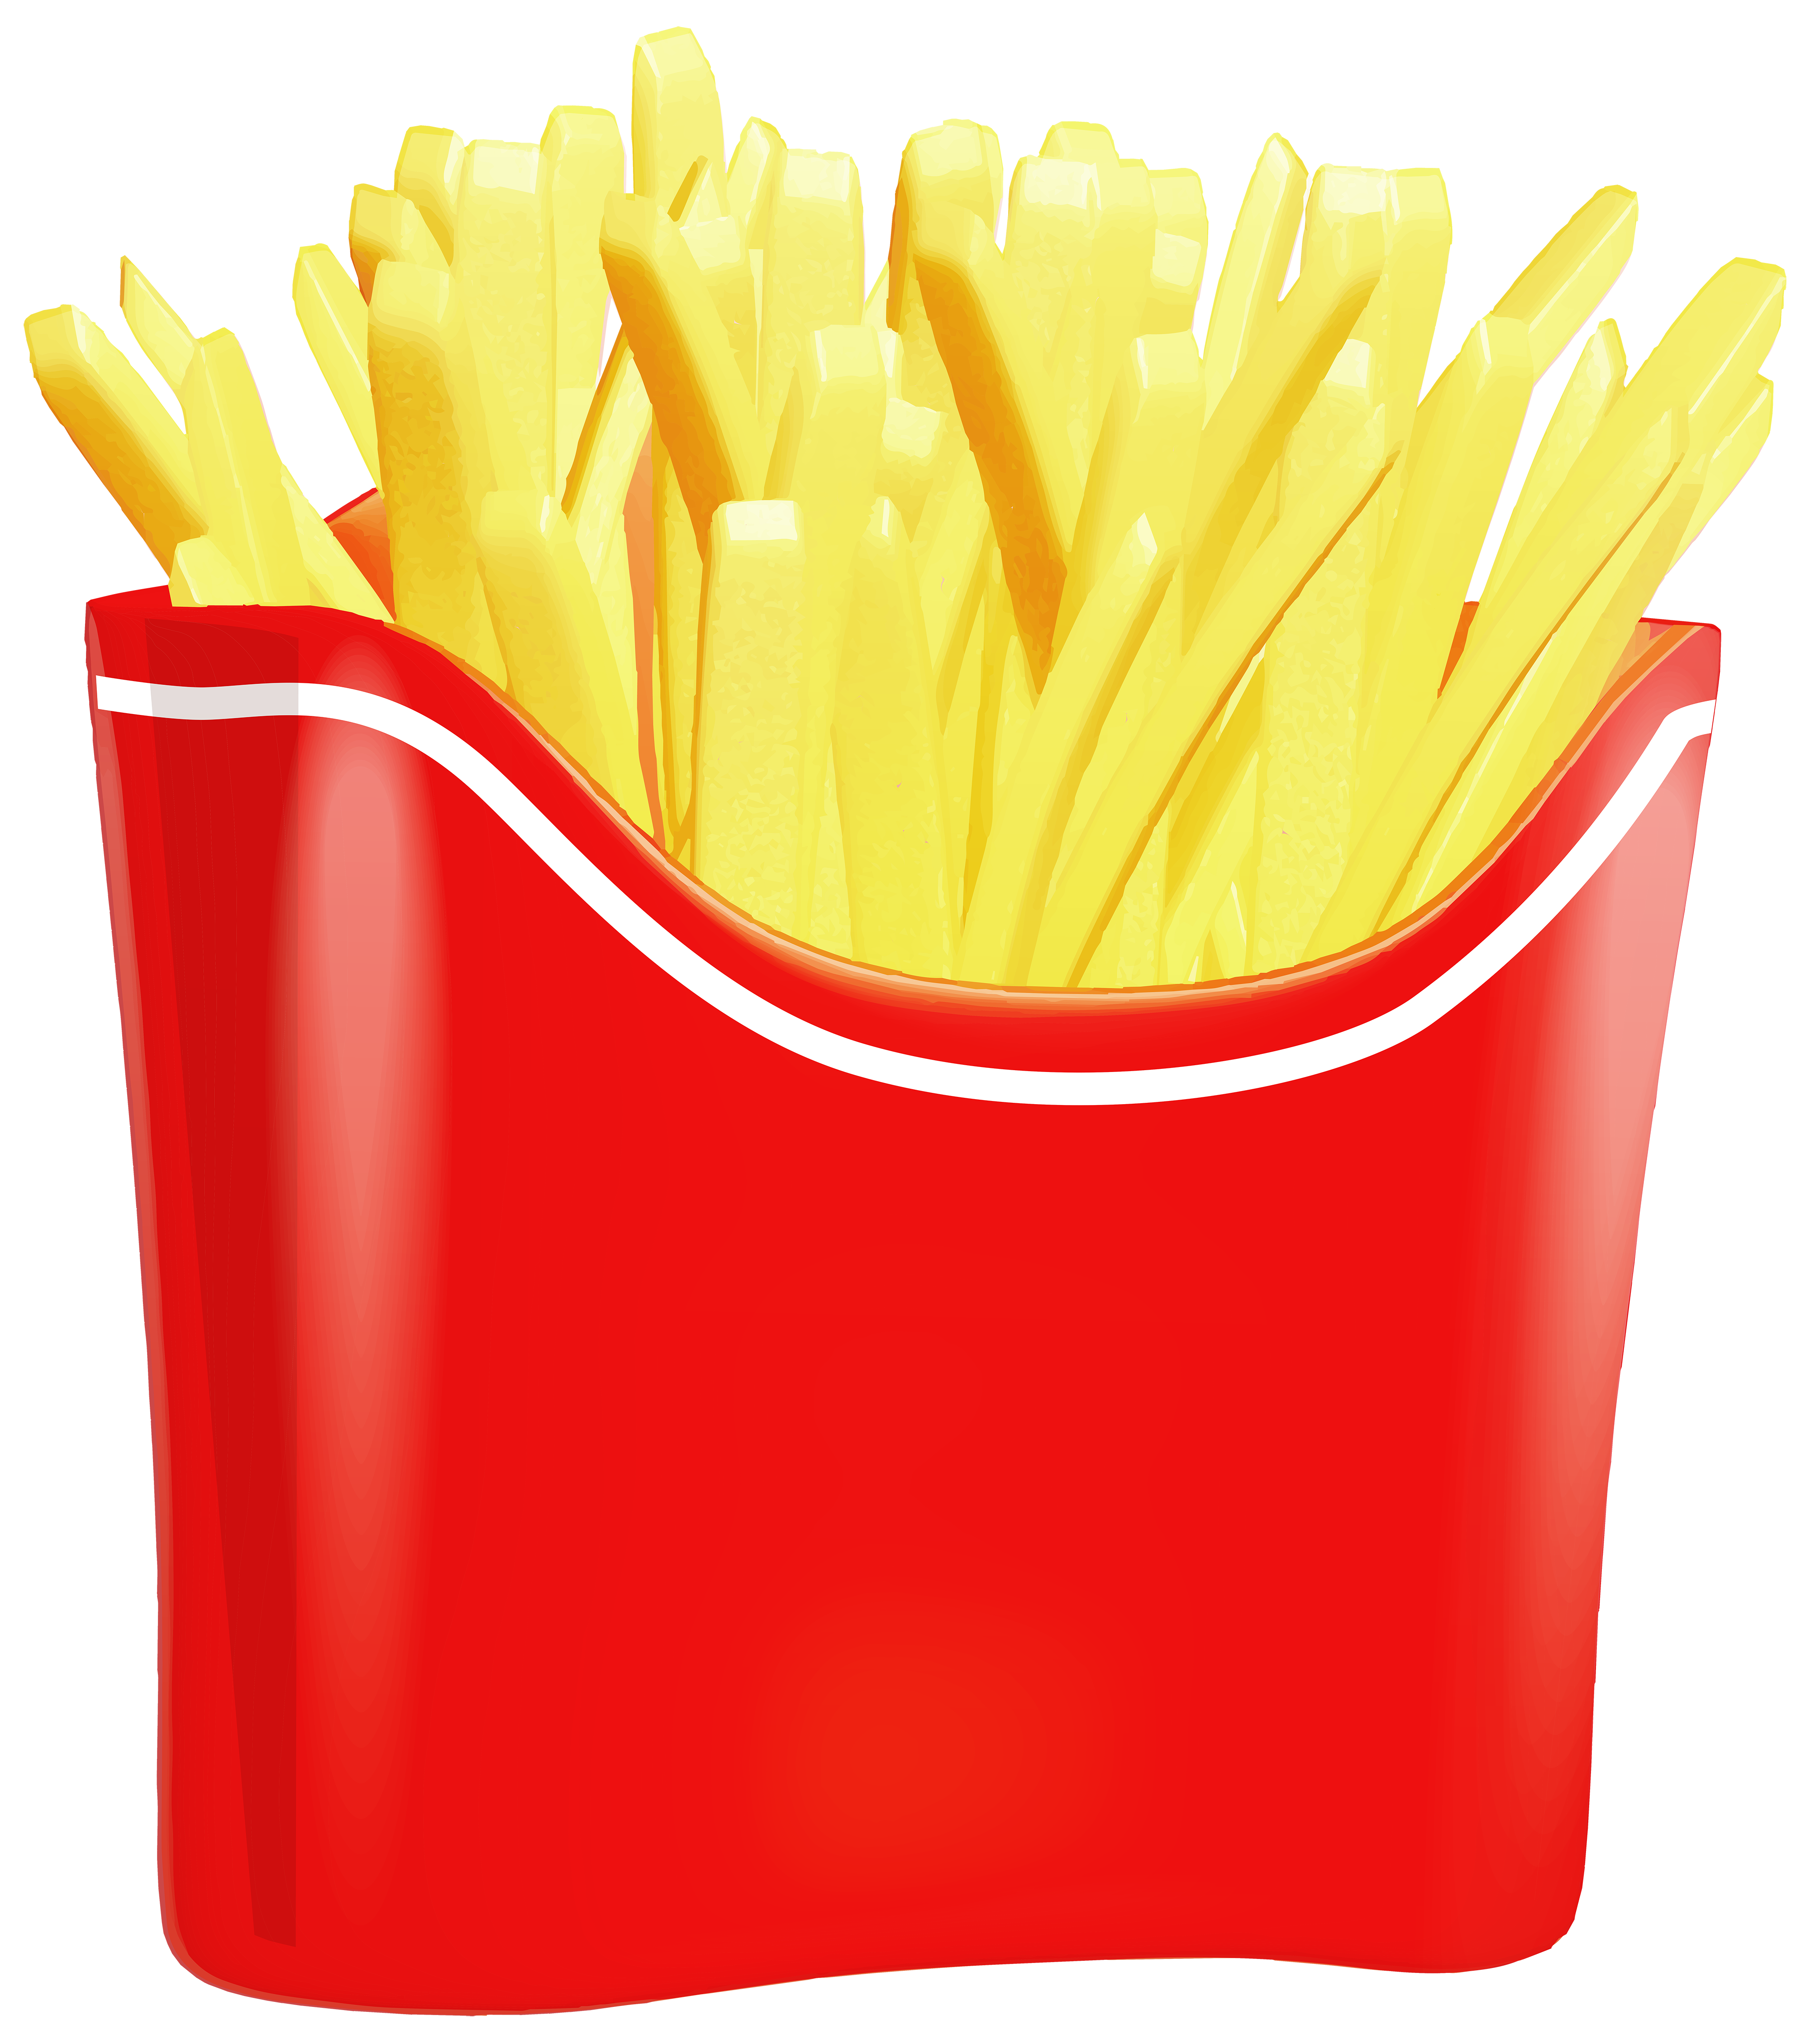 Clipart french fries - Clipar - French Fries Clip Art